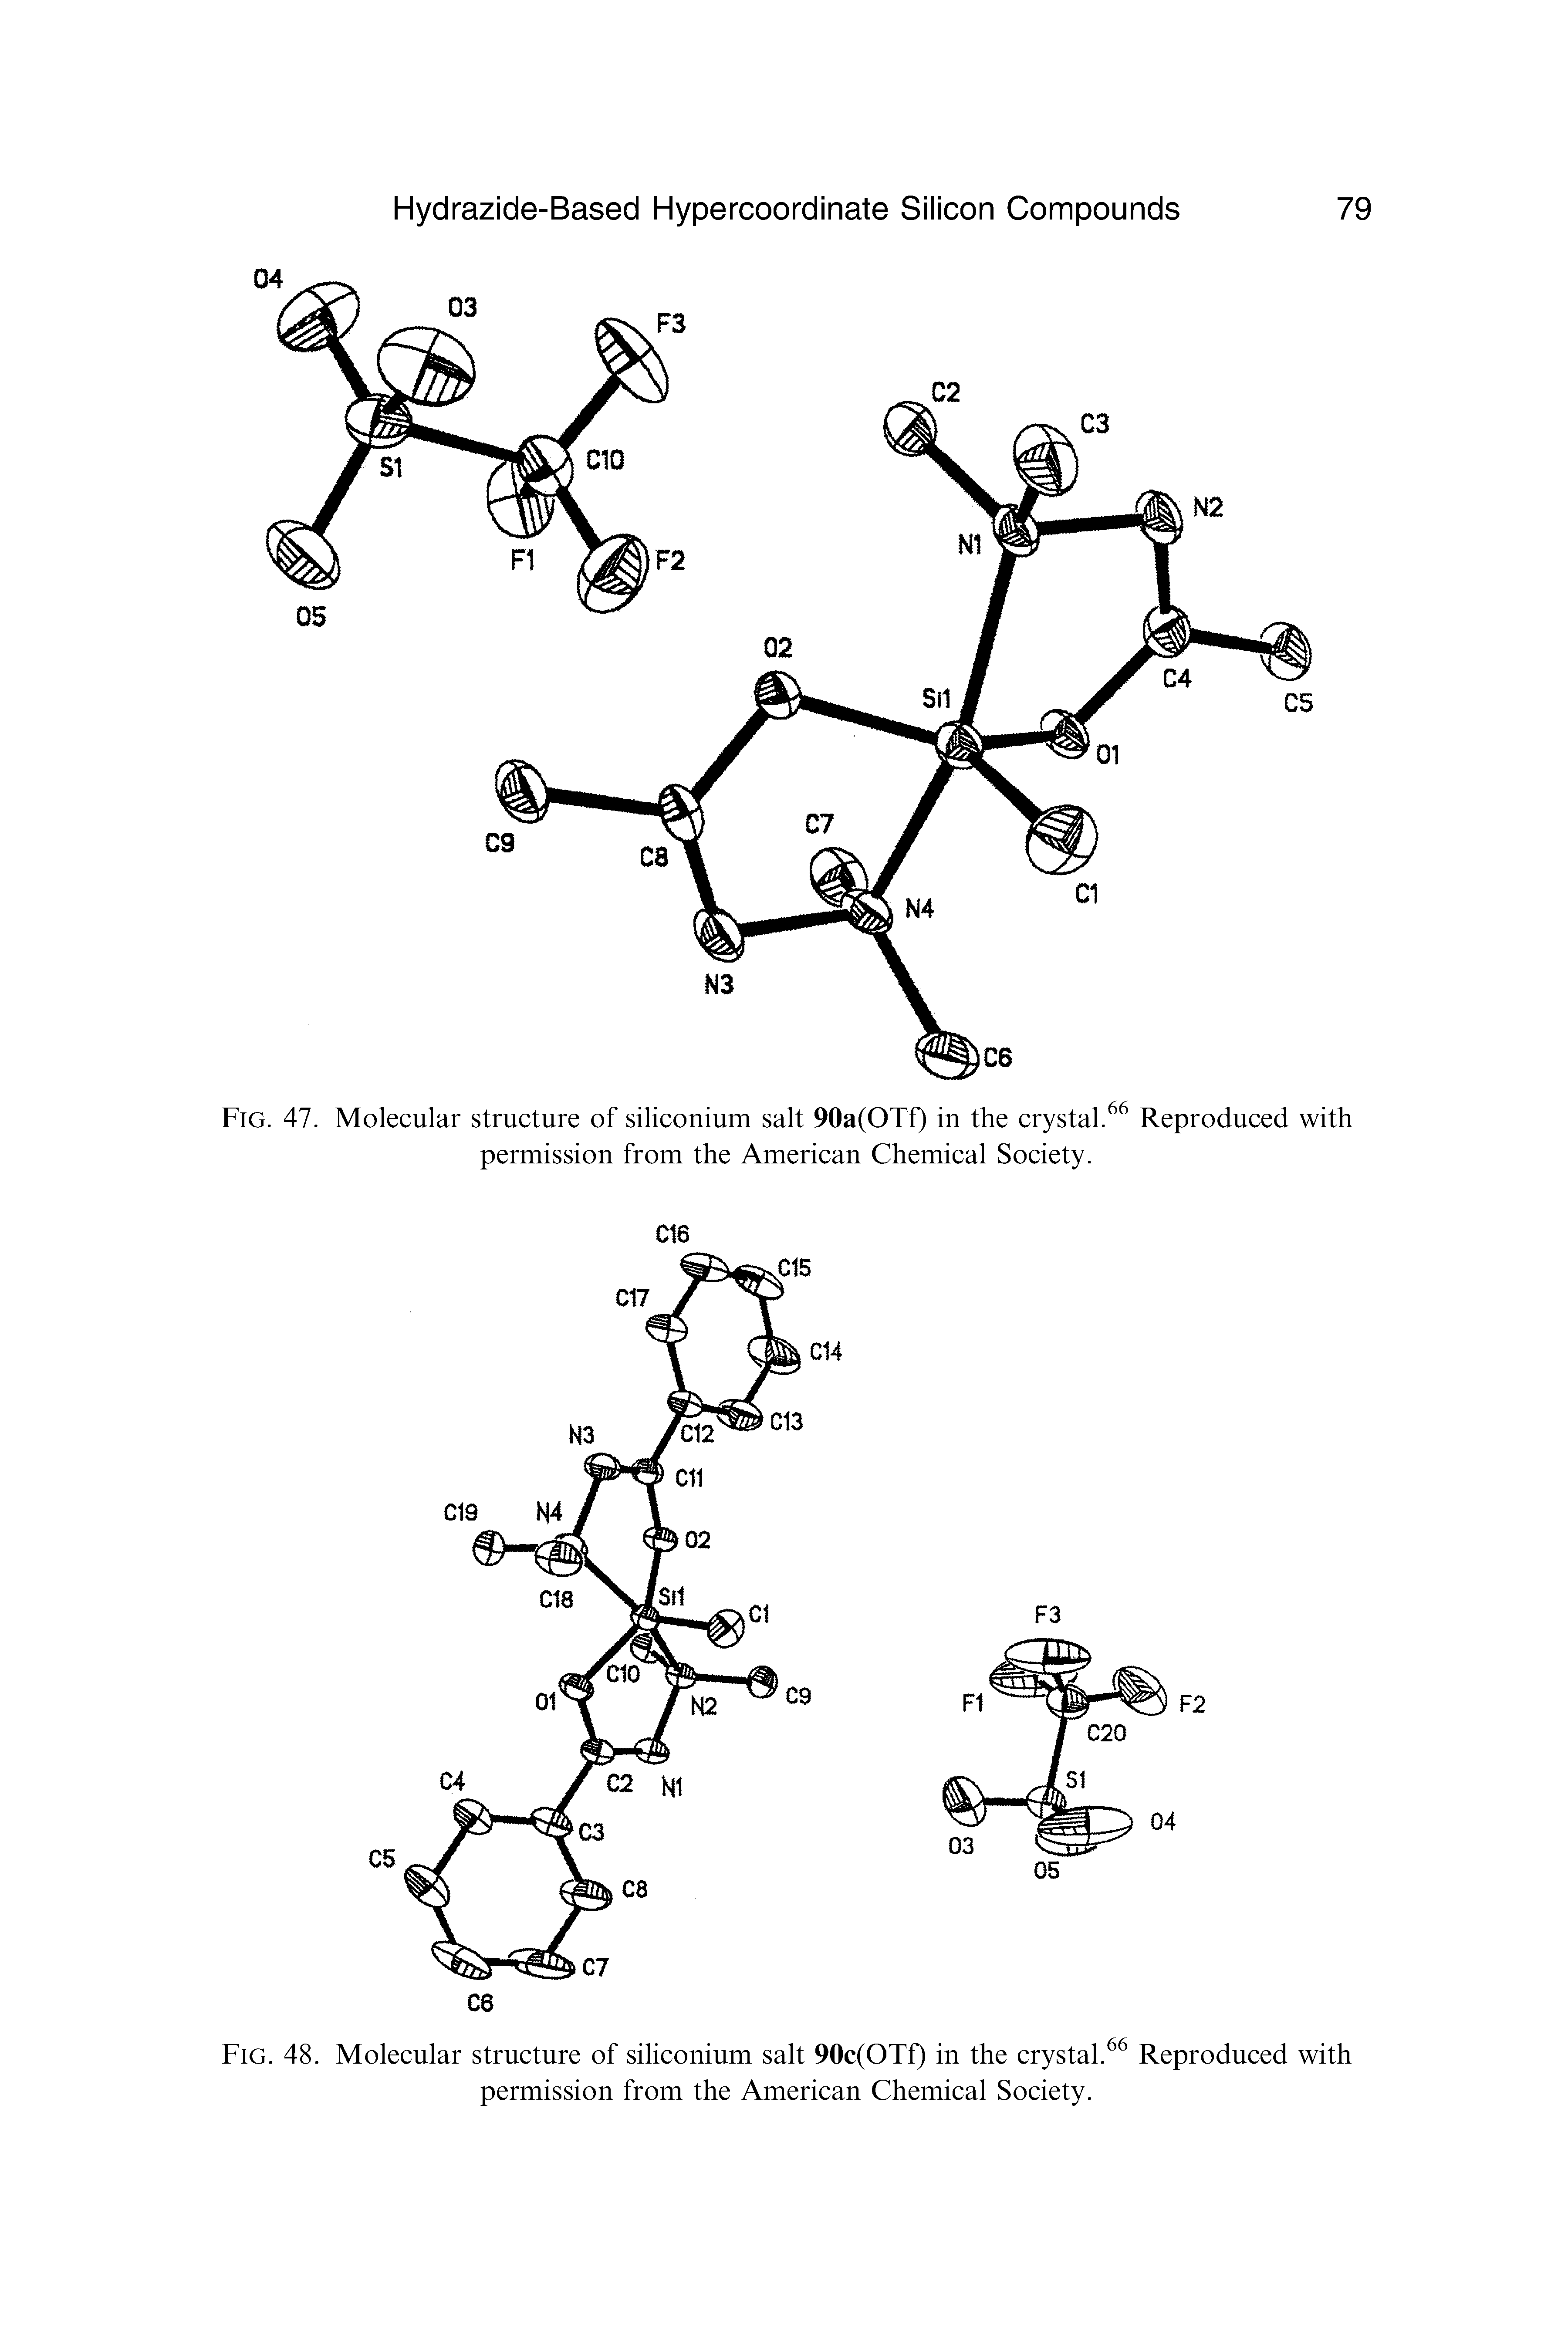 Fig. 47. Molecular structure of siliconium salt 90a(OTf) in the crystal.66 Reproduced with permission from the American Chemical Society.